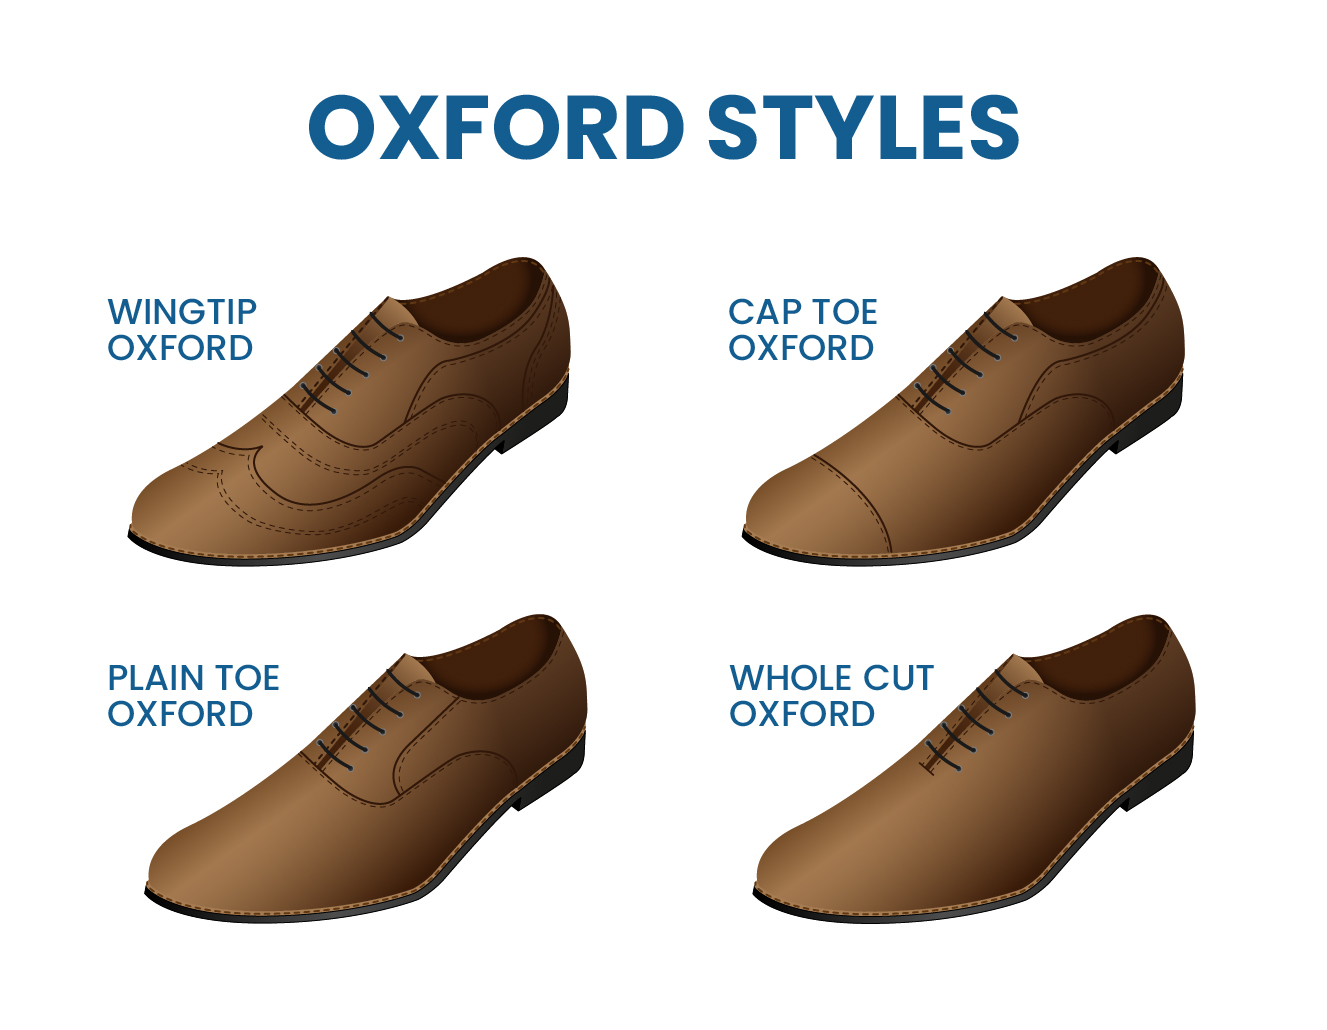 Total 86+ imagen shoes similar to oxfords - Abzlocal.mx